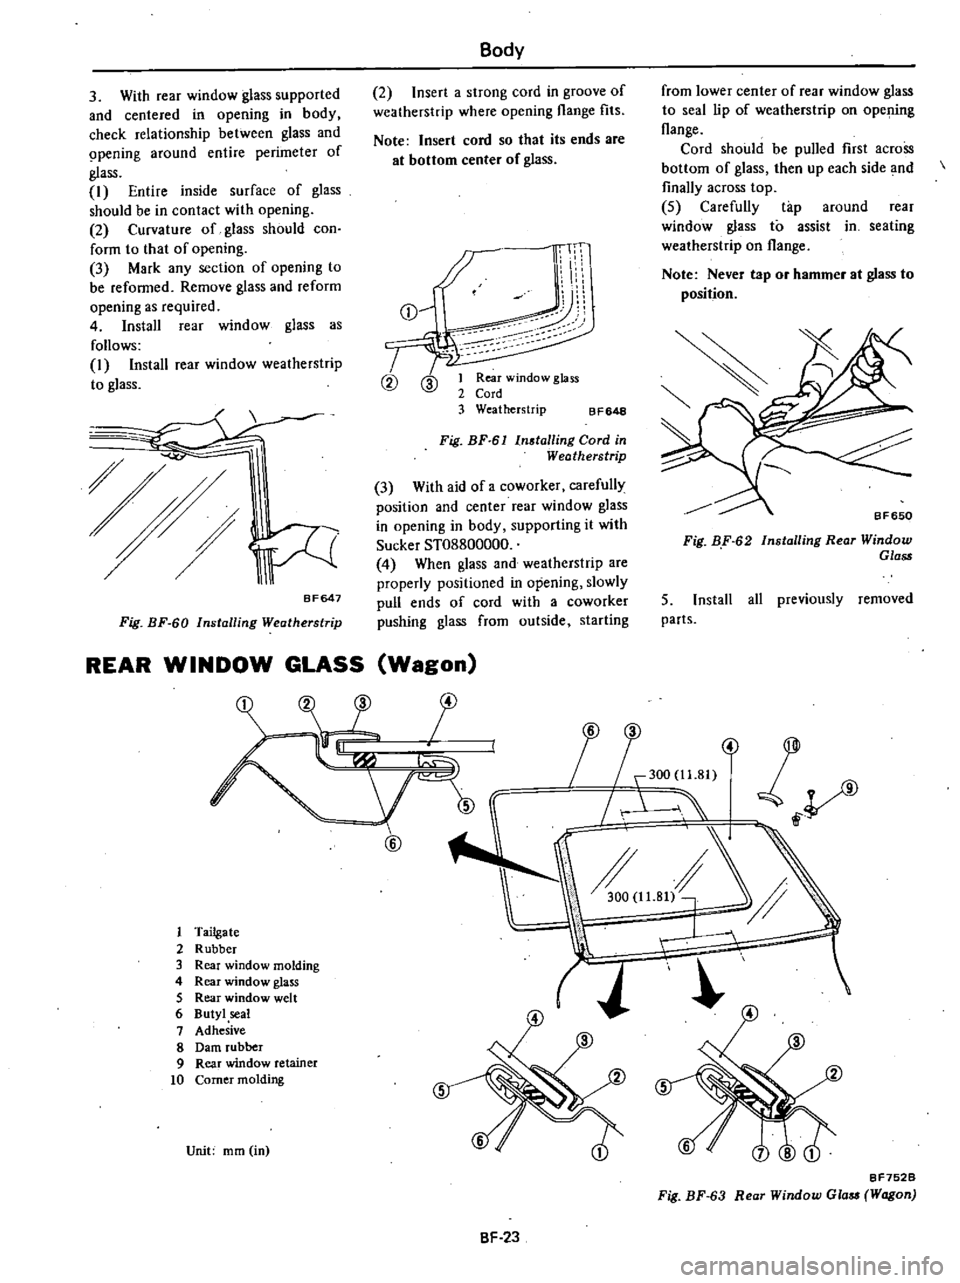 DATSUN 210 1979  Service Manual 
Body

2 
Insert 
a

strong 
cord 
in

groove 
of

weatherstrip 
where

opening 
flange 
fits

Note 
Insert

cord 
so

that 
its 
ends 
are

at 
bottom 
center 
of

glass 
from 
lower 
center 
of 
rea